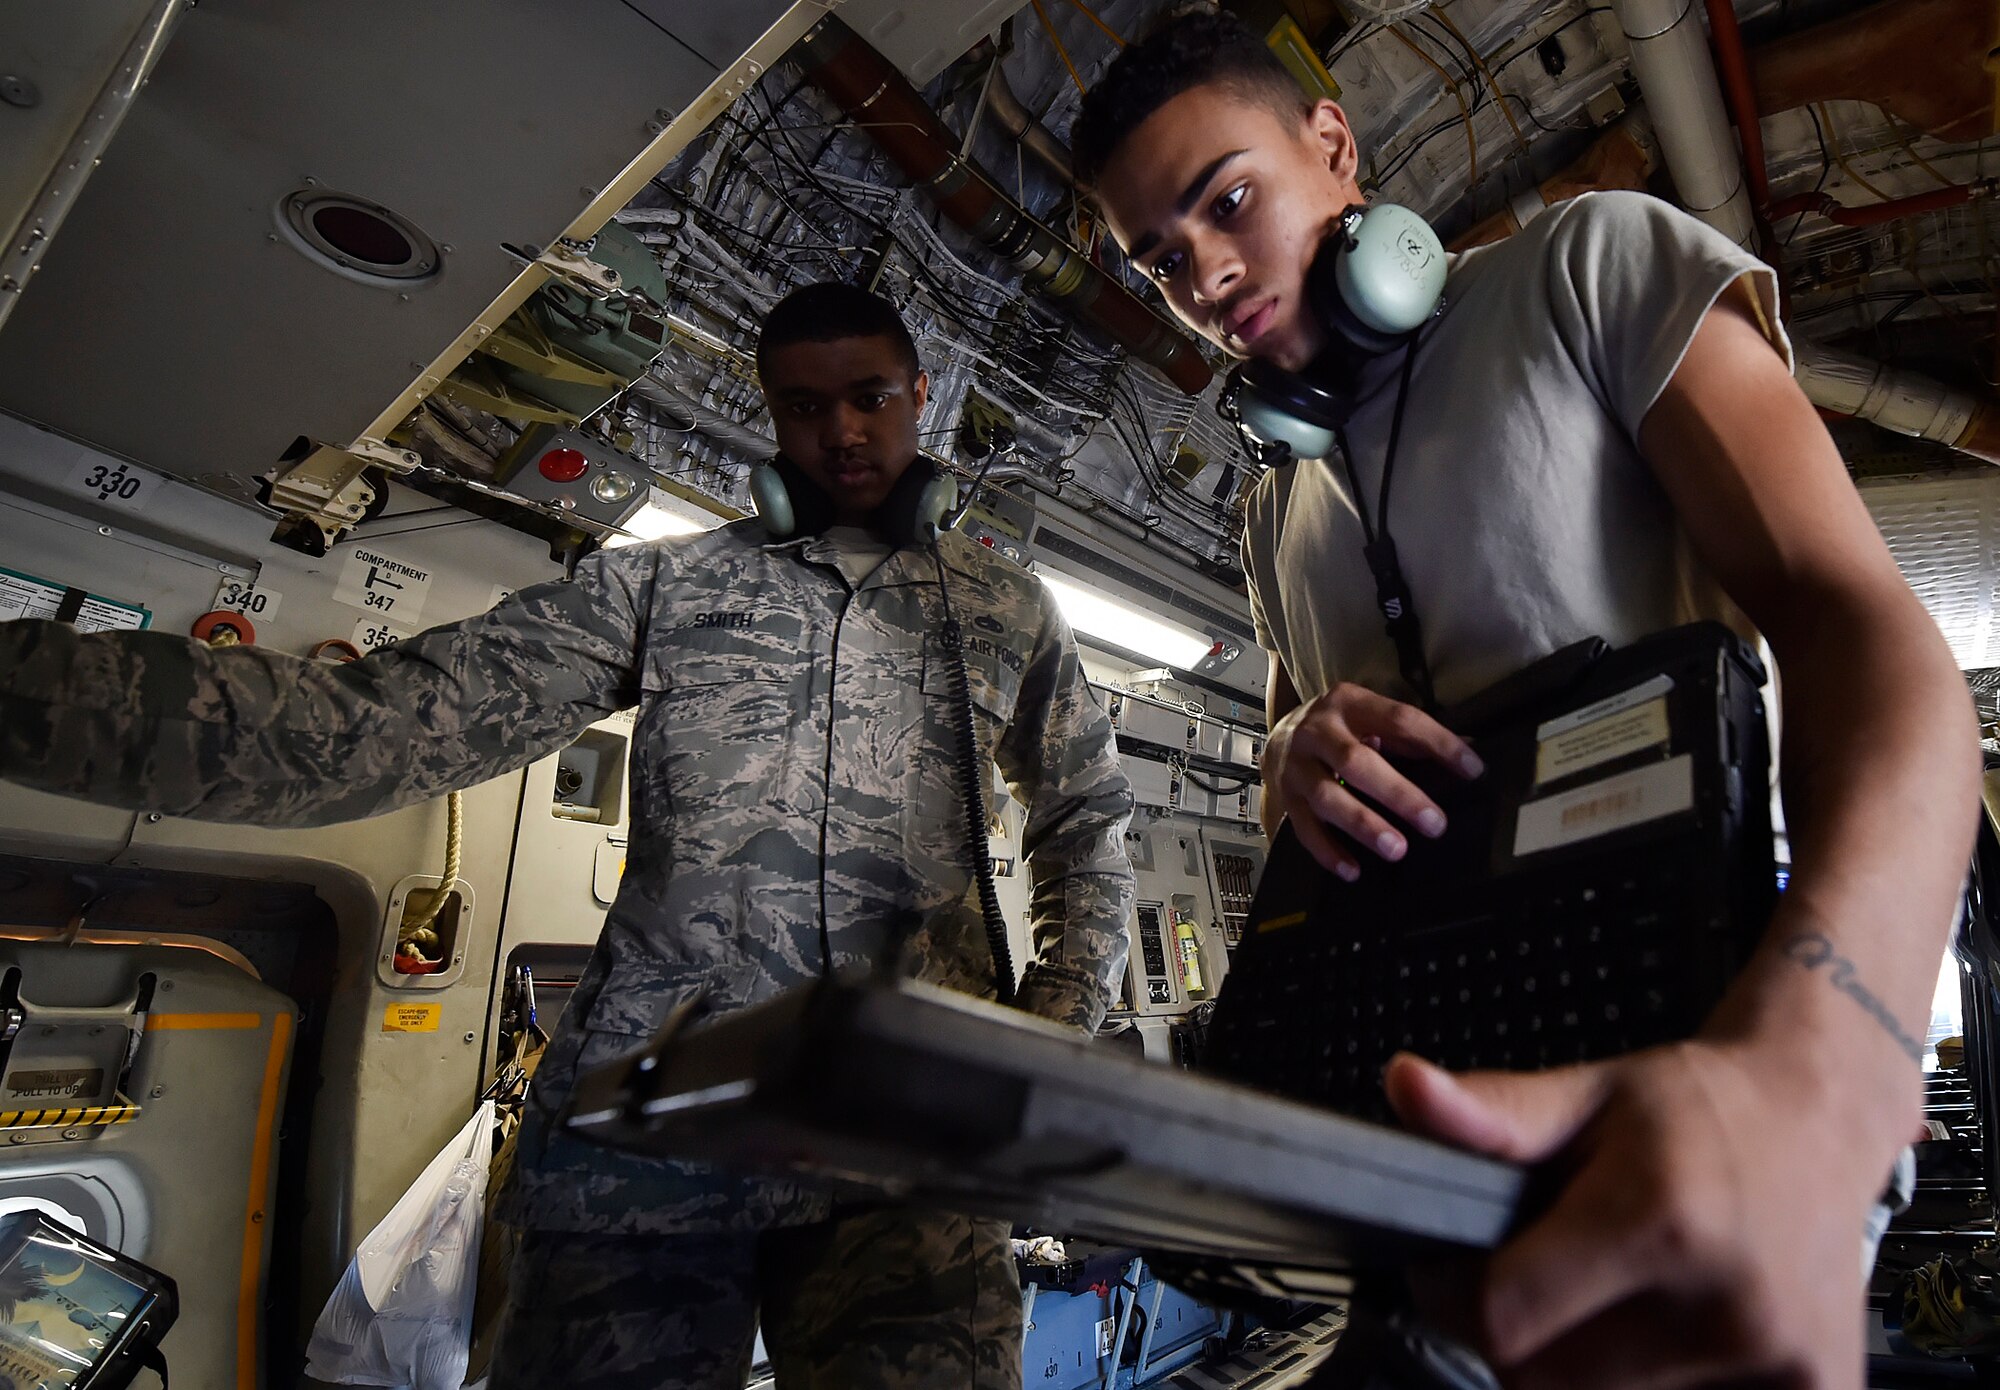 Airman 1st Class Jamar Finnie, right, 437th Aircraft Maintenance Squadron instrument and flight control systems apprentice and Tech. Sgt. Timothy Smith, 437th AMXS, conduct prelaunch checks for a C-17 Globemaster III here, prior to departing for Joint Base Lewis-McChord, Washington State, in support of Exercise Mobility Guardian July 31. Mobility Guardian is designed to enhance the capabilities of mobility Airmen to succeed in dynamic threat environments. The exercise features more than 3,000 participants and involves 25 countries from July 31 to Aug. 11. (U.S. Air Force photo by Staff Sgt. Christopher Hubenthal)